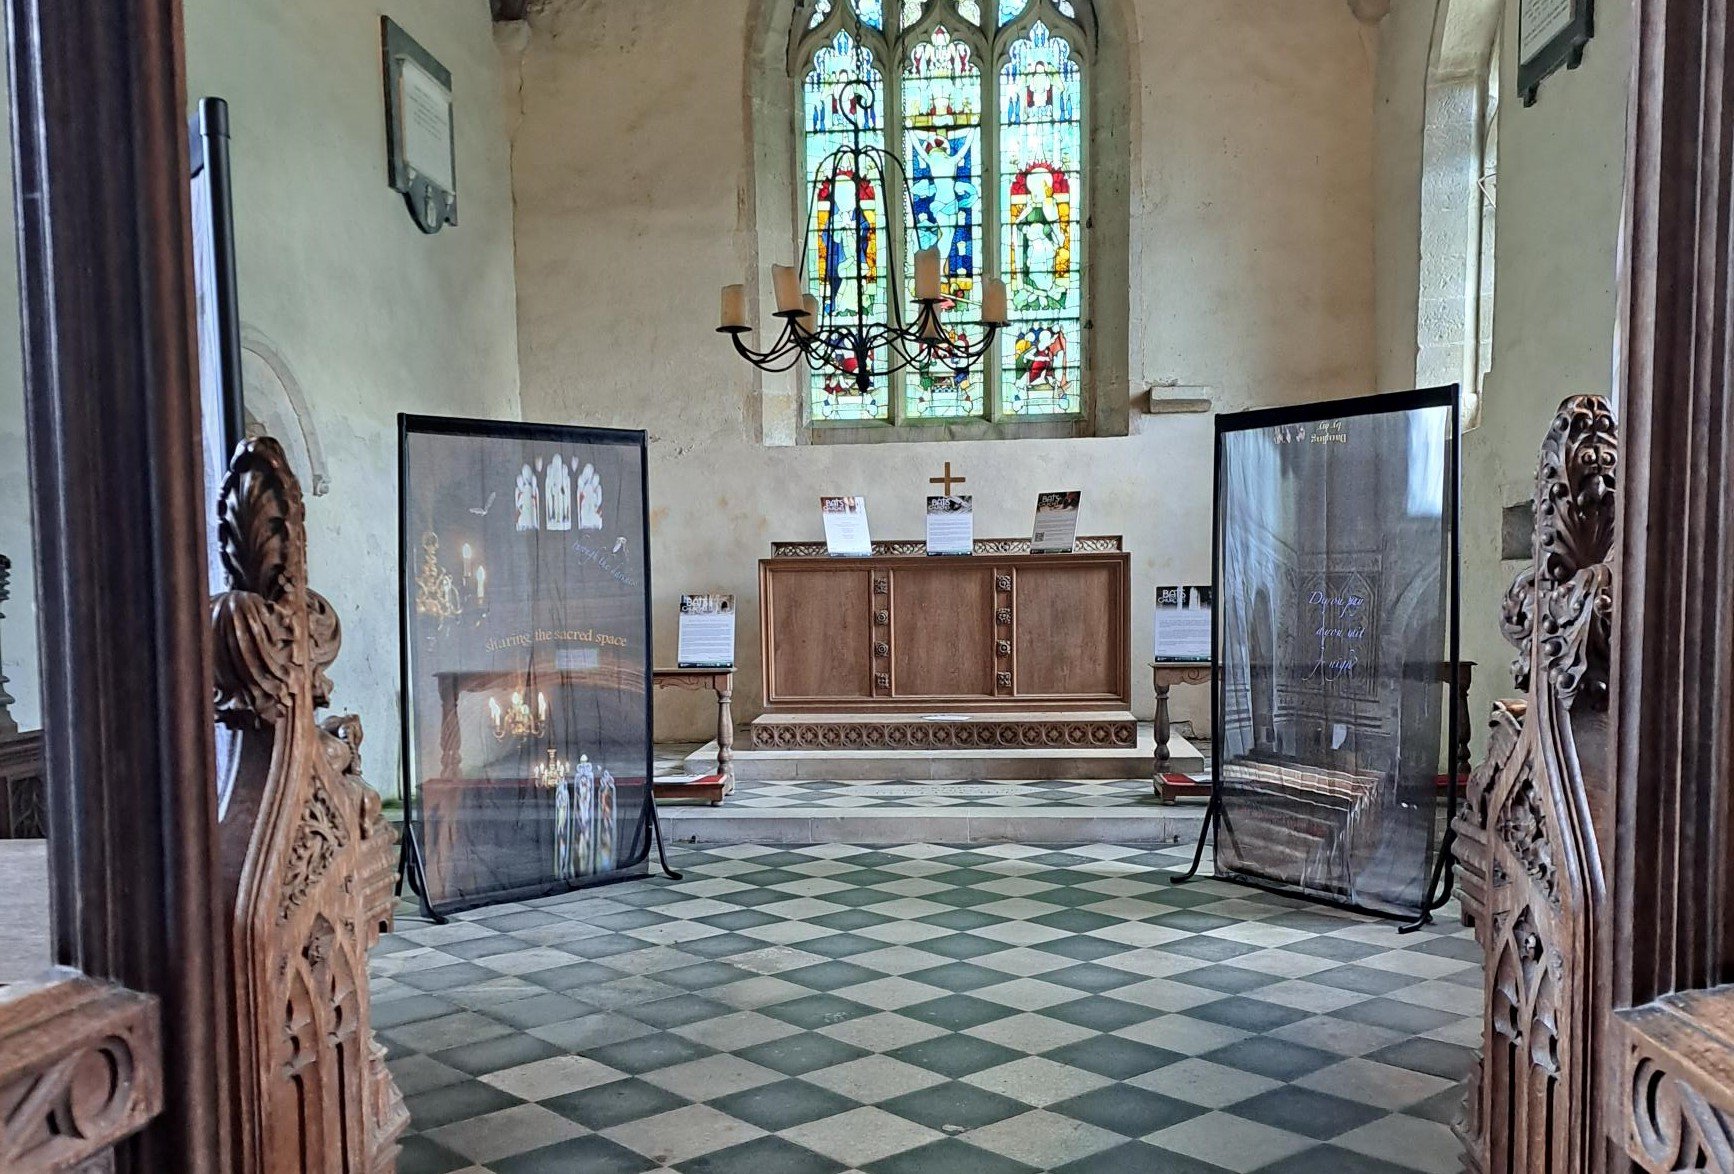 Two panels from the On A Wing And A Prayer art installation on display inside the chancel of Wintringham church